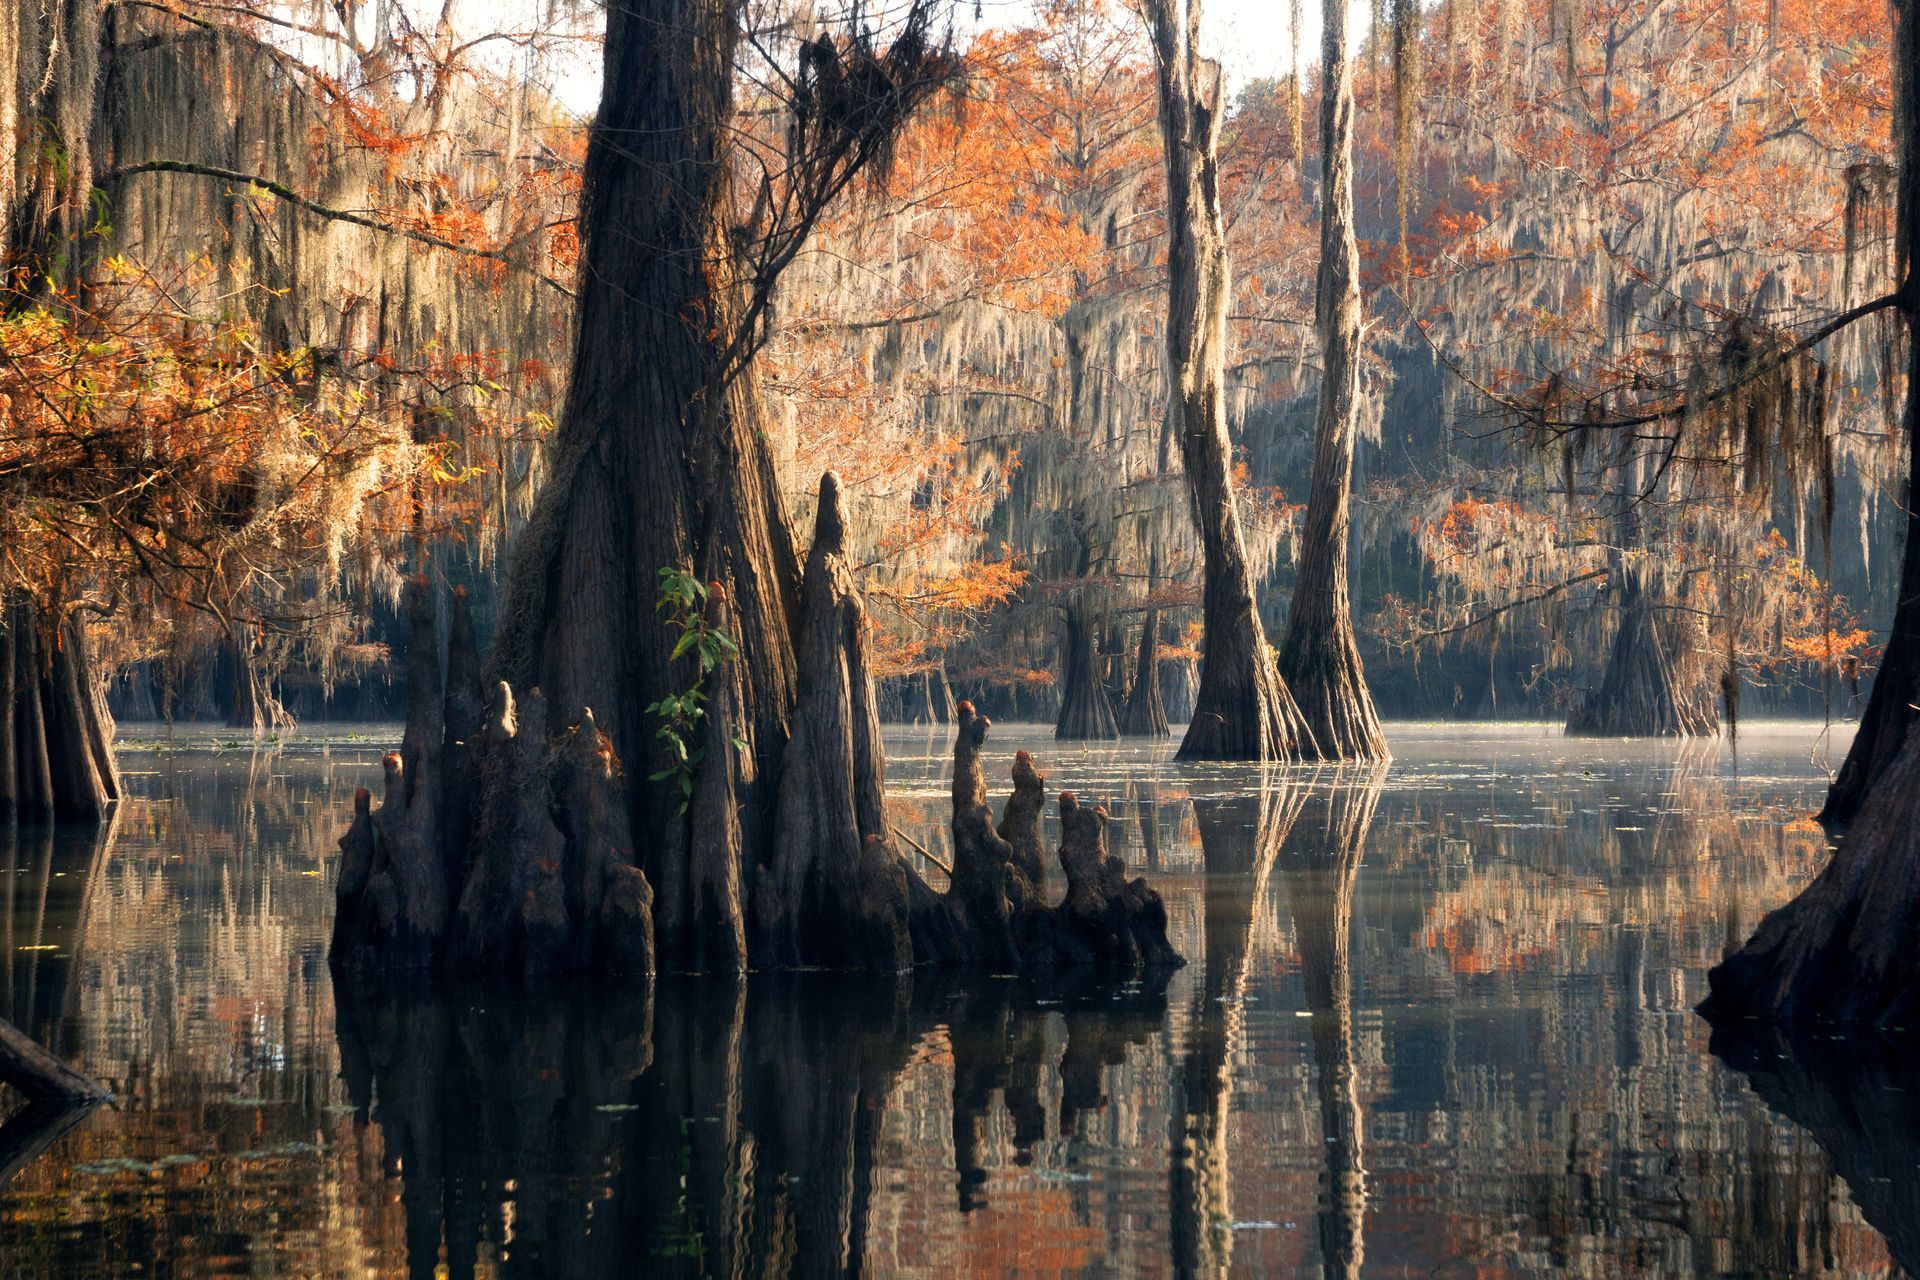 A swamp with trees growing out of the water